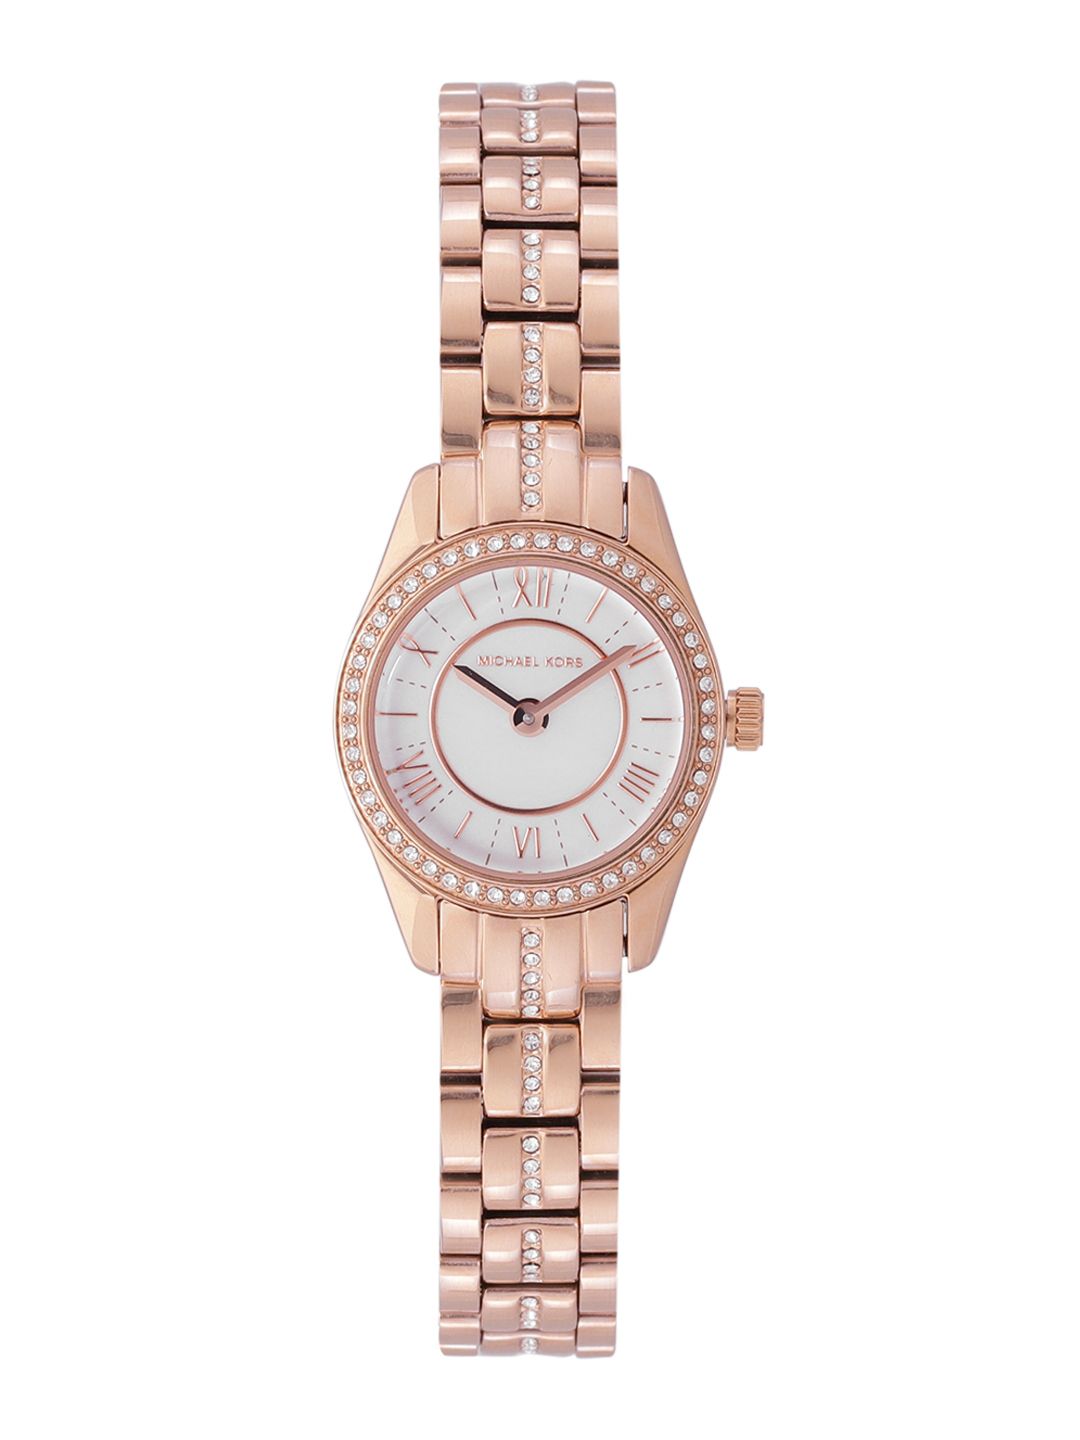 Michael Kors Women White Dial & Rose-Gold Toned Bracelet Style Analogue Watch MK4485 Price in India